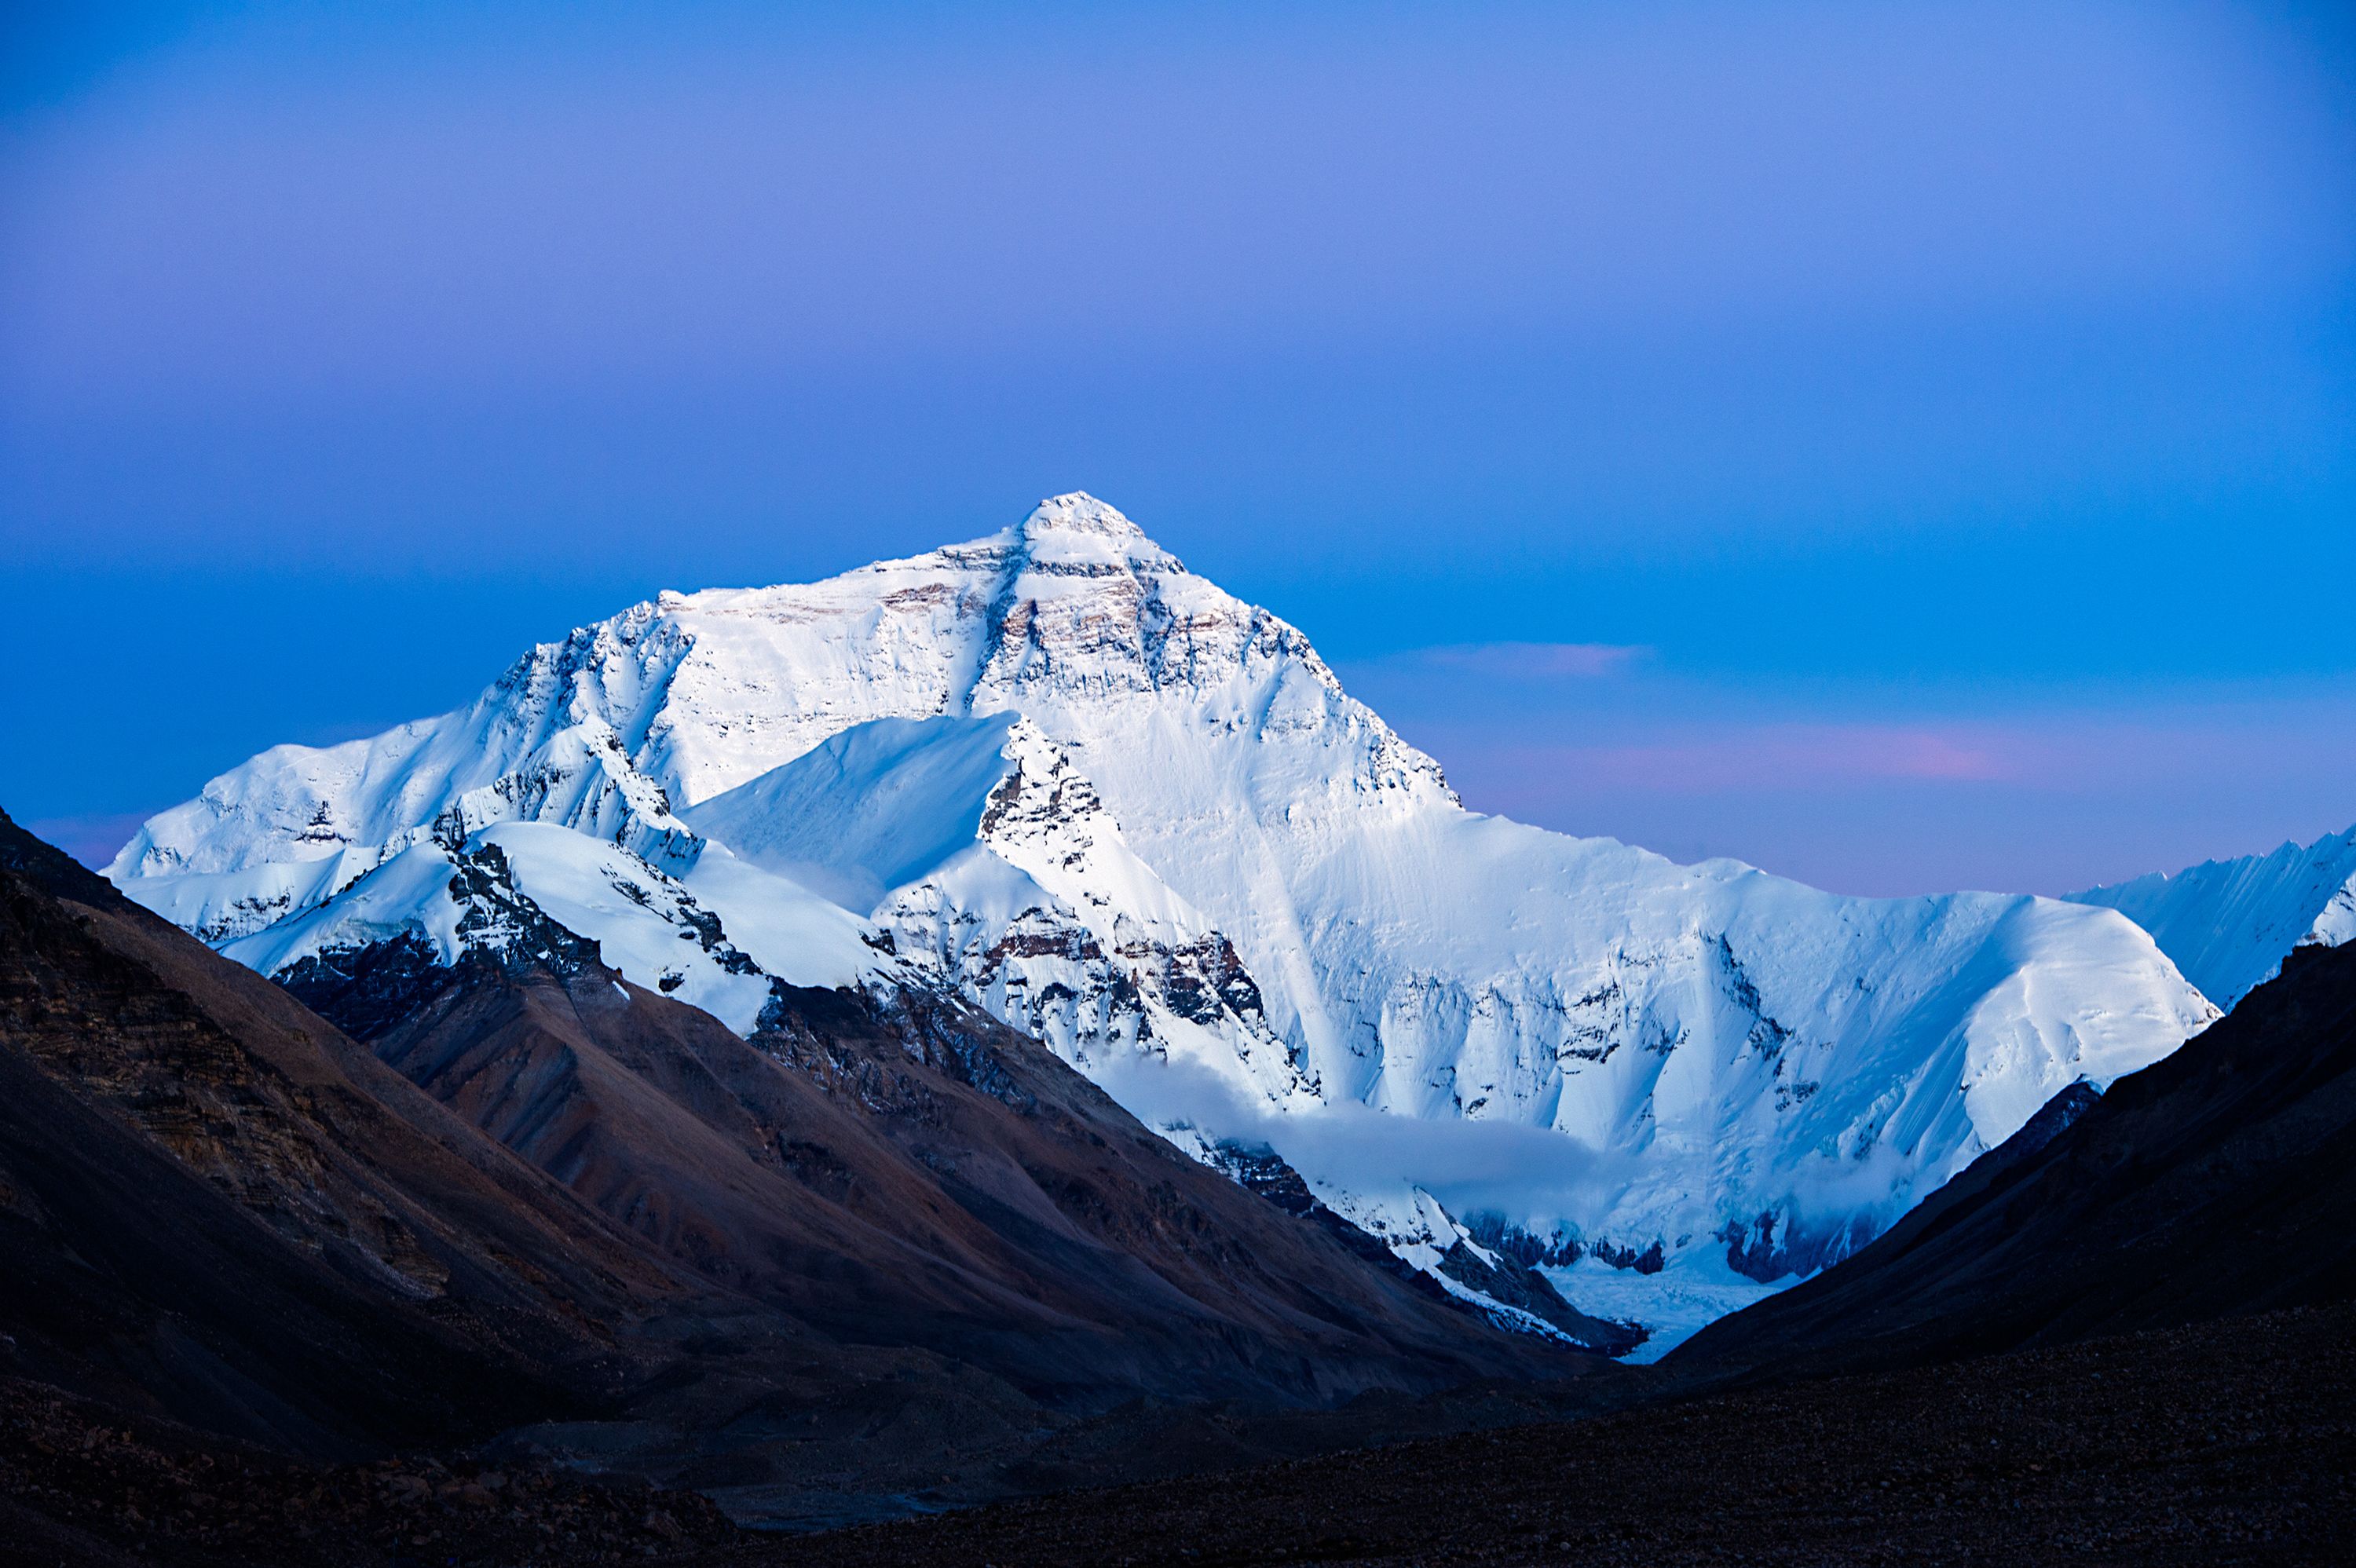 Mount Everest has lost 2,000 years' worth of ice in less than